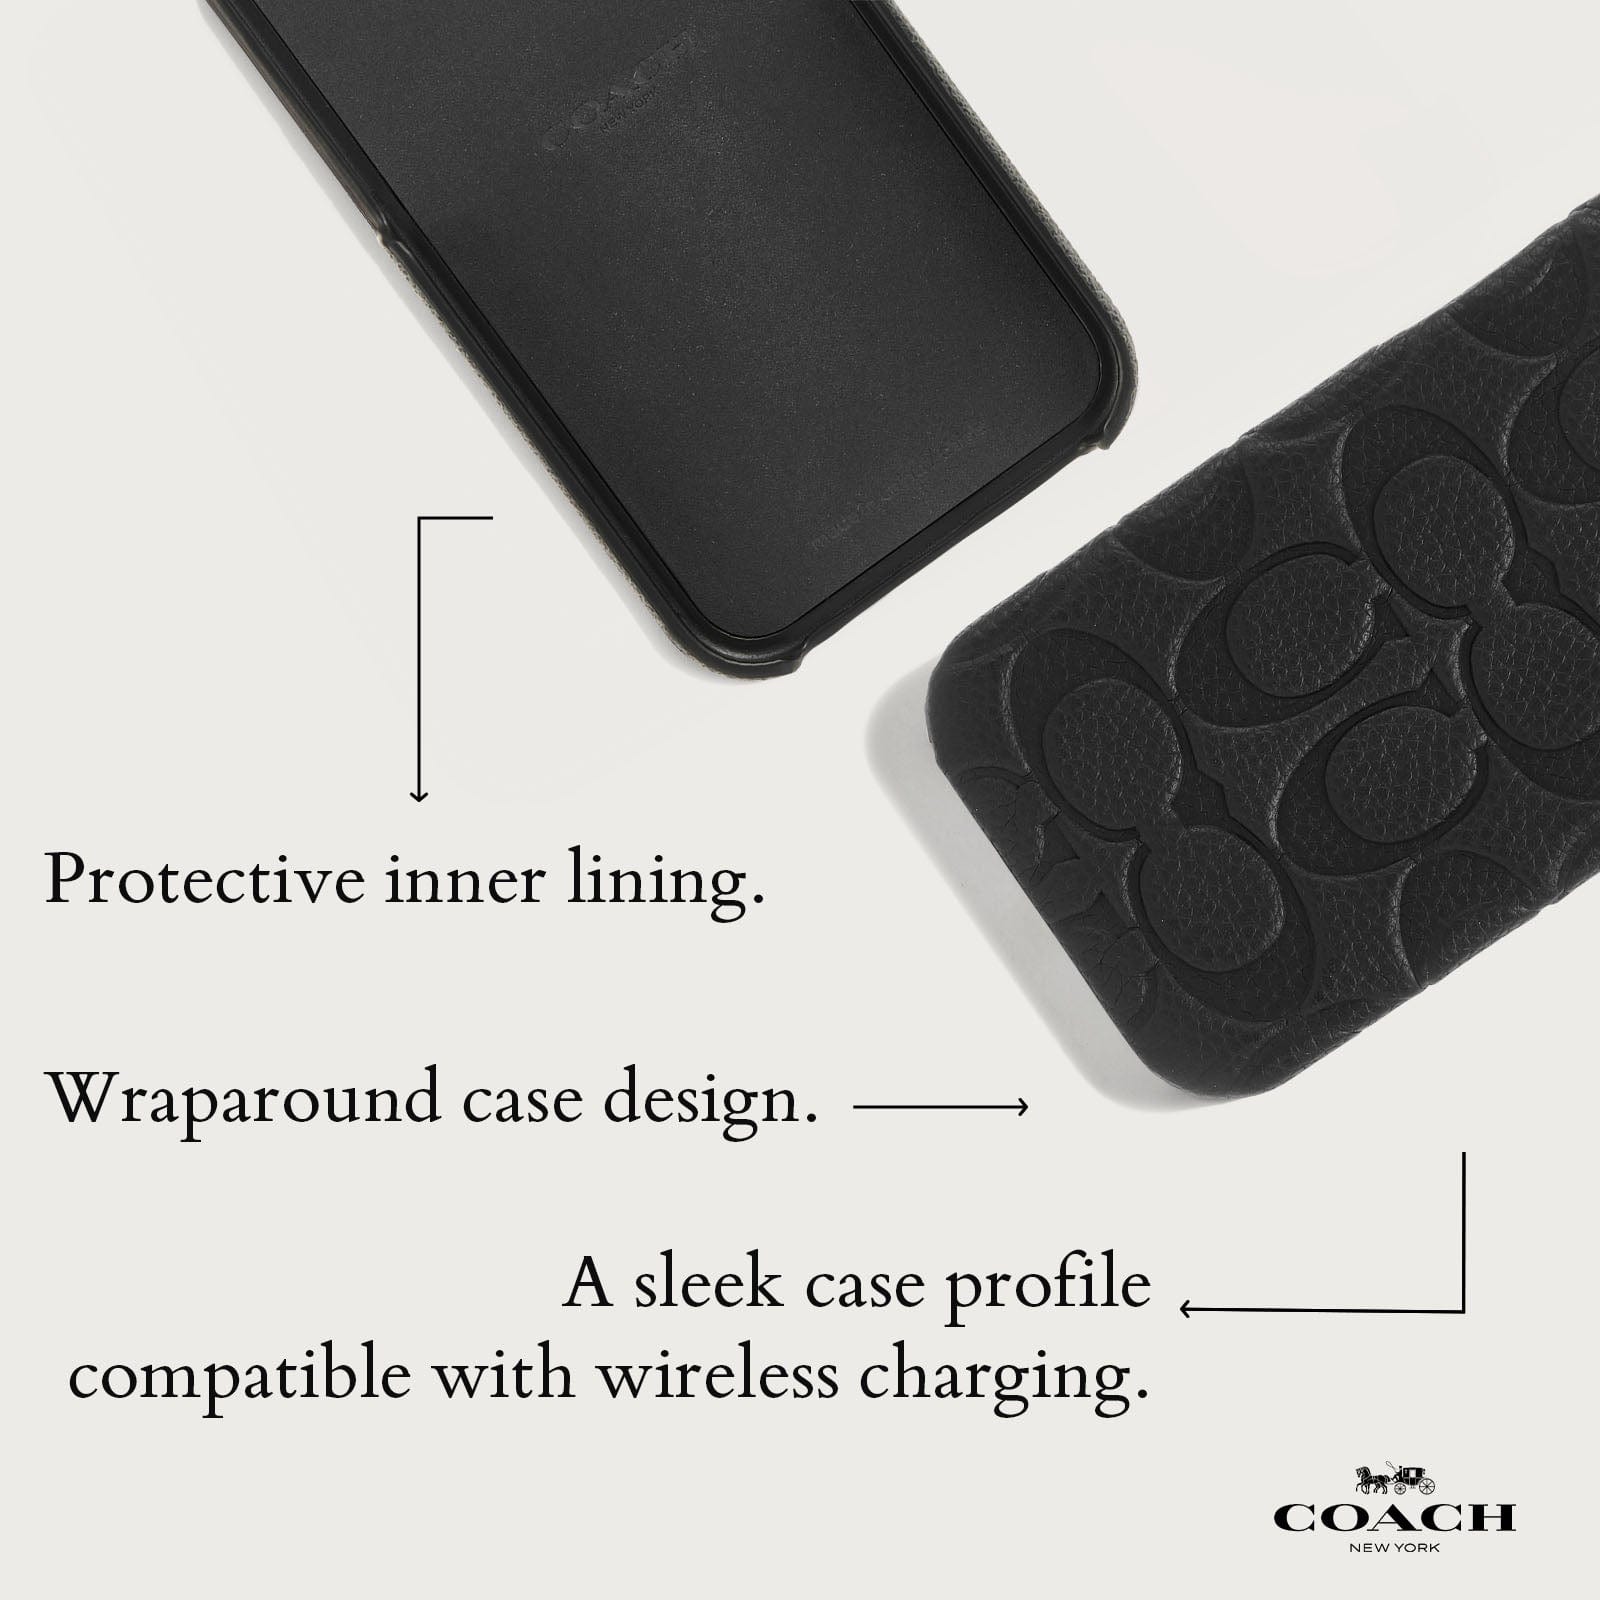 PROTECTIVE INNER LINING. WRAPAROUND CASE DESIGN. A SLEEK CASE PROFILE COMPATIBLE WITH WIRELESS CHARGING